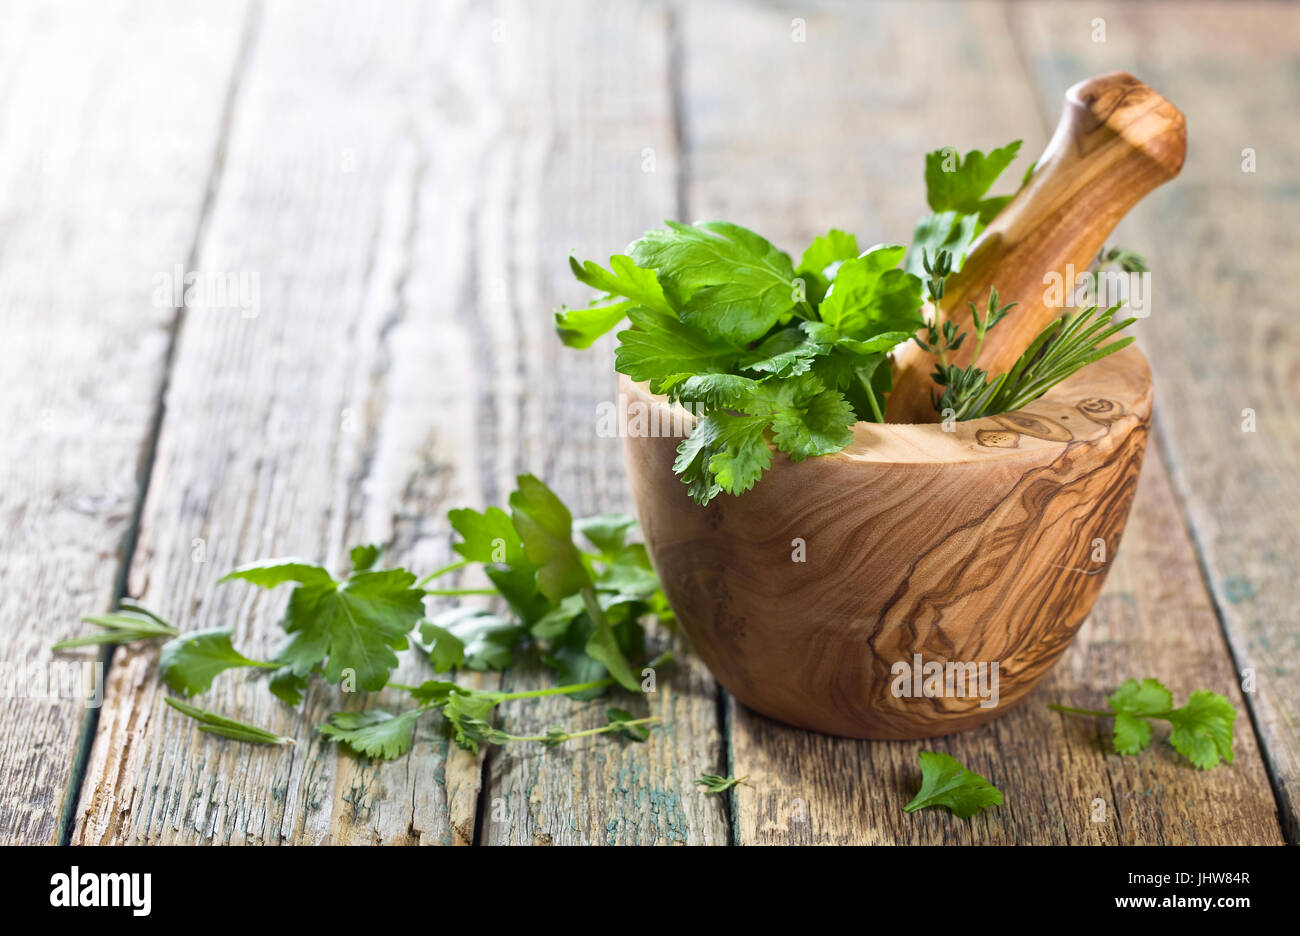 Different herbs on a old wooden table . Wooden mortar with rosemary, coriander, thyme and parsley. Stock Photo